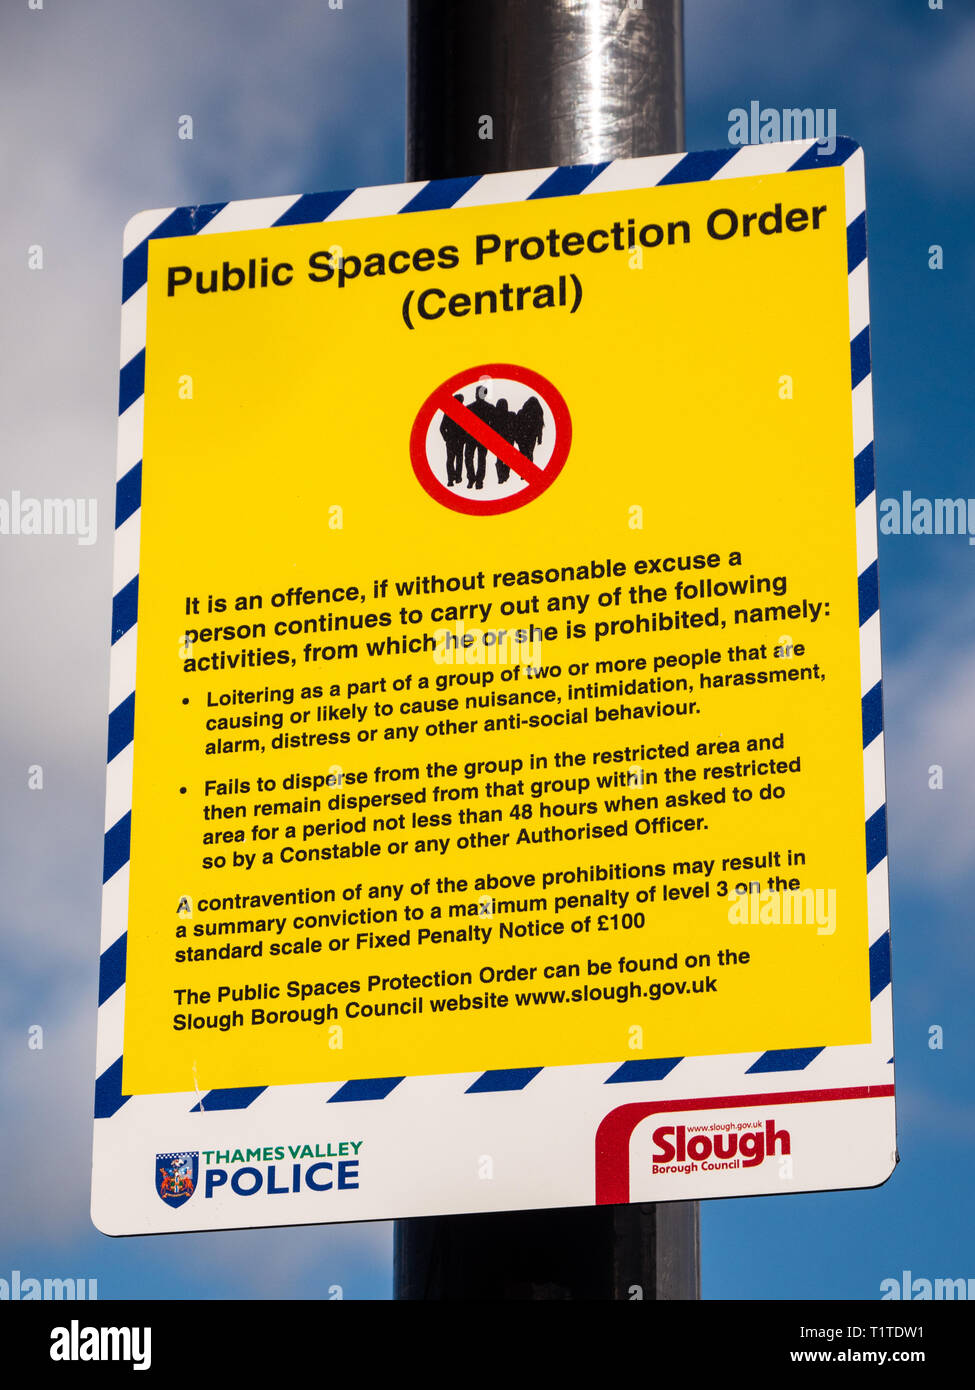 Public Spaces Protection Order, Sign, Slough, Berkshire, England, UK, GB. Stock Photo